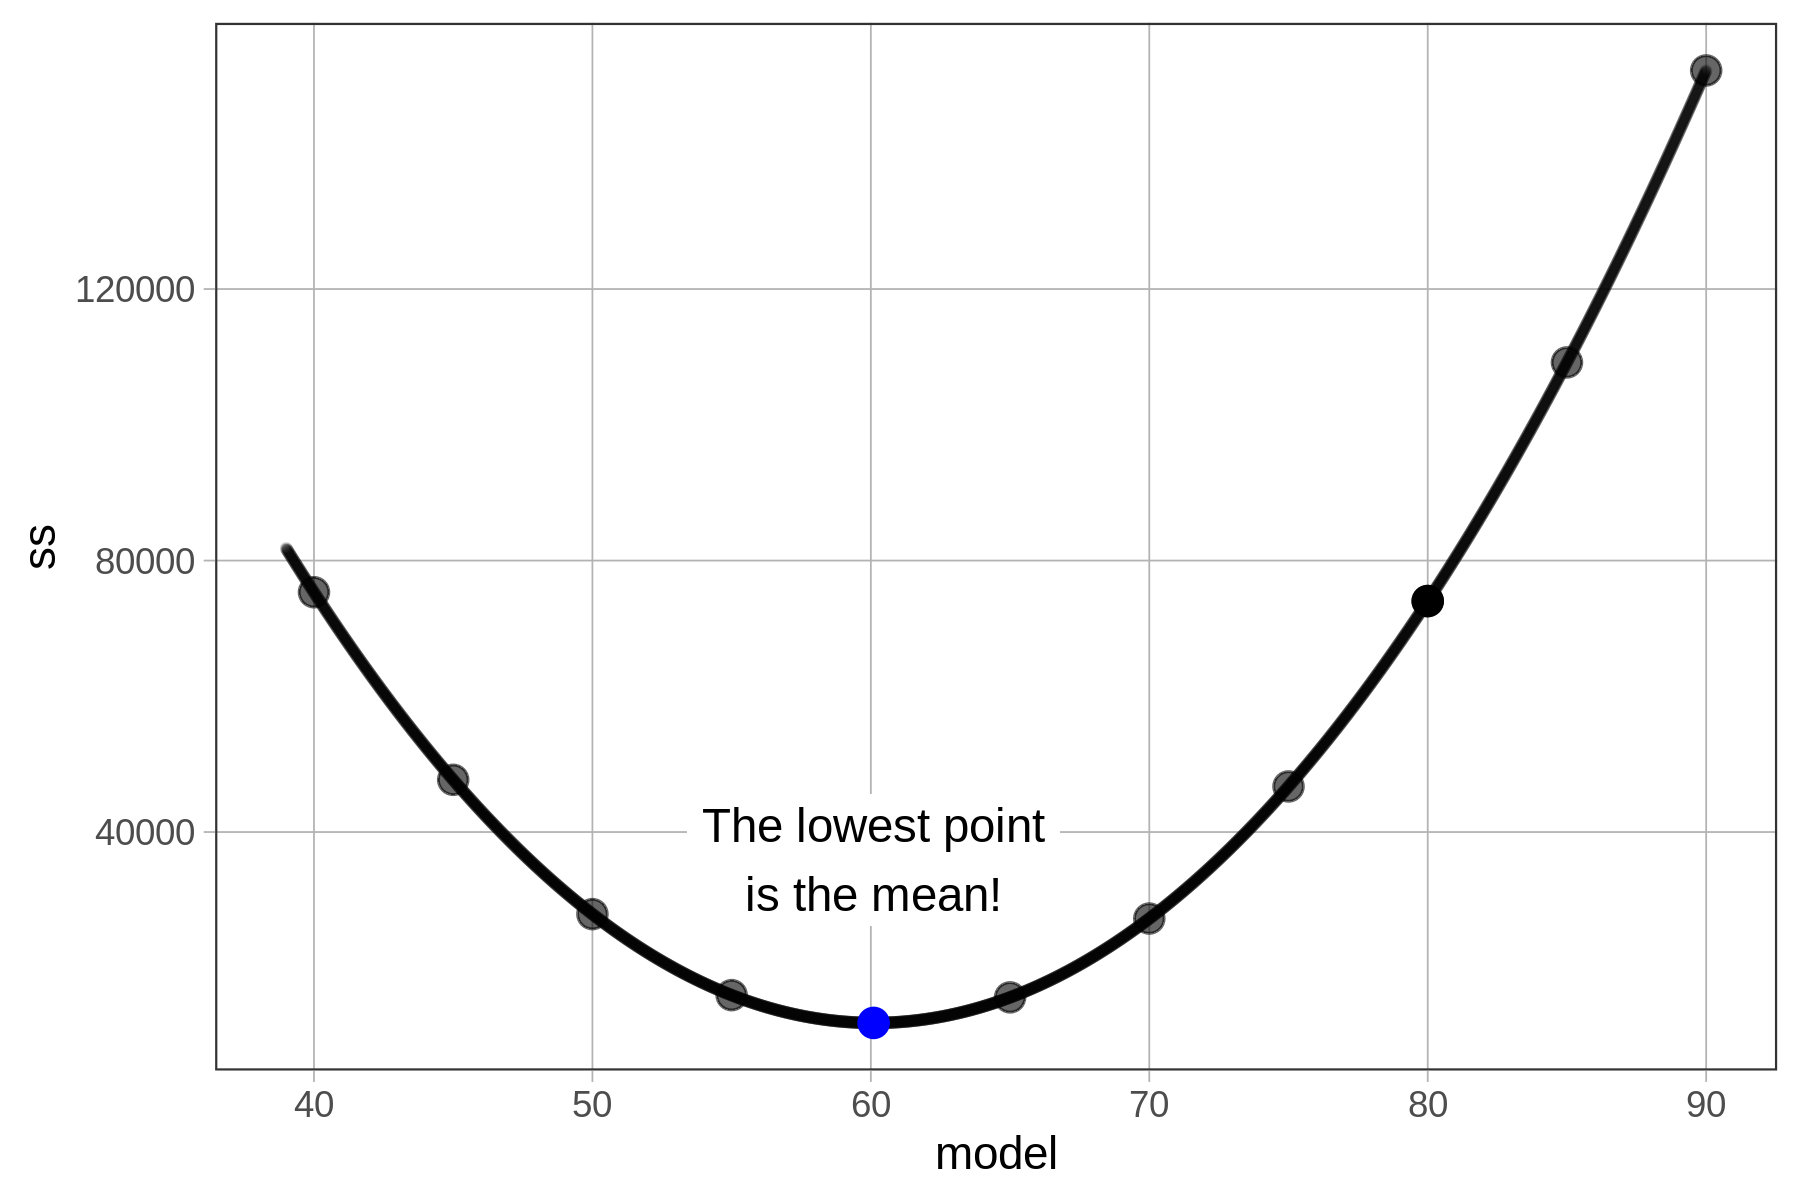 Scatterplot of SS on the y-axis and model on the x-axis. The points are distributed in a curved shape, and are overlaid with a smoothed out line along the points. The lowest point of the curve is the mean at a model of 60.